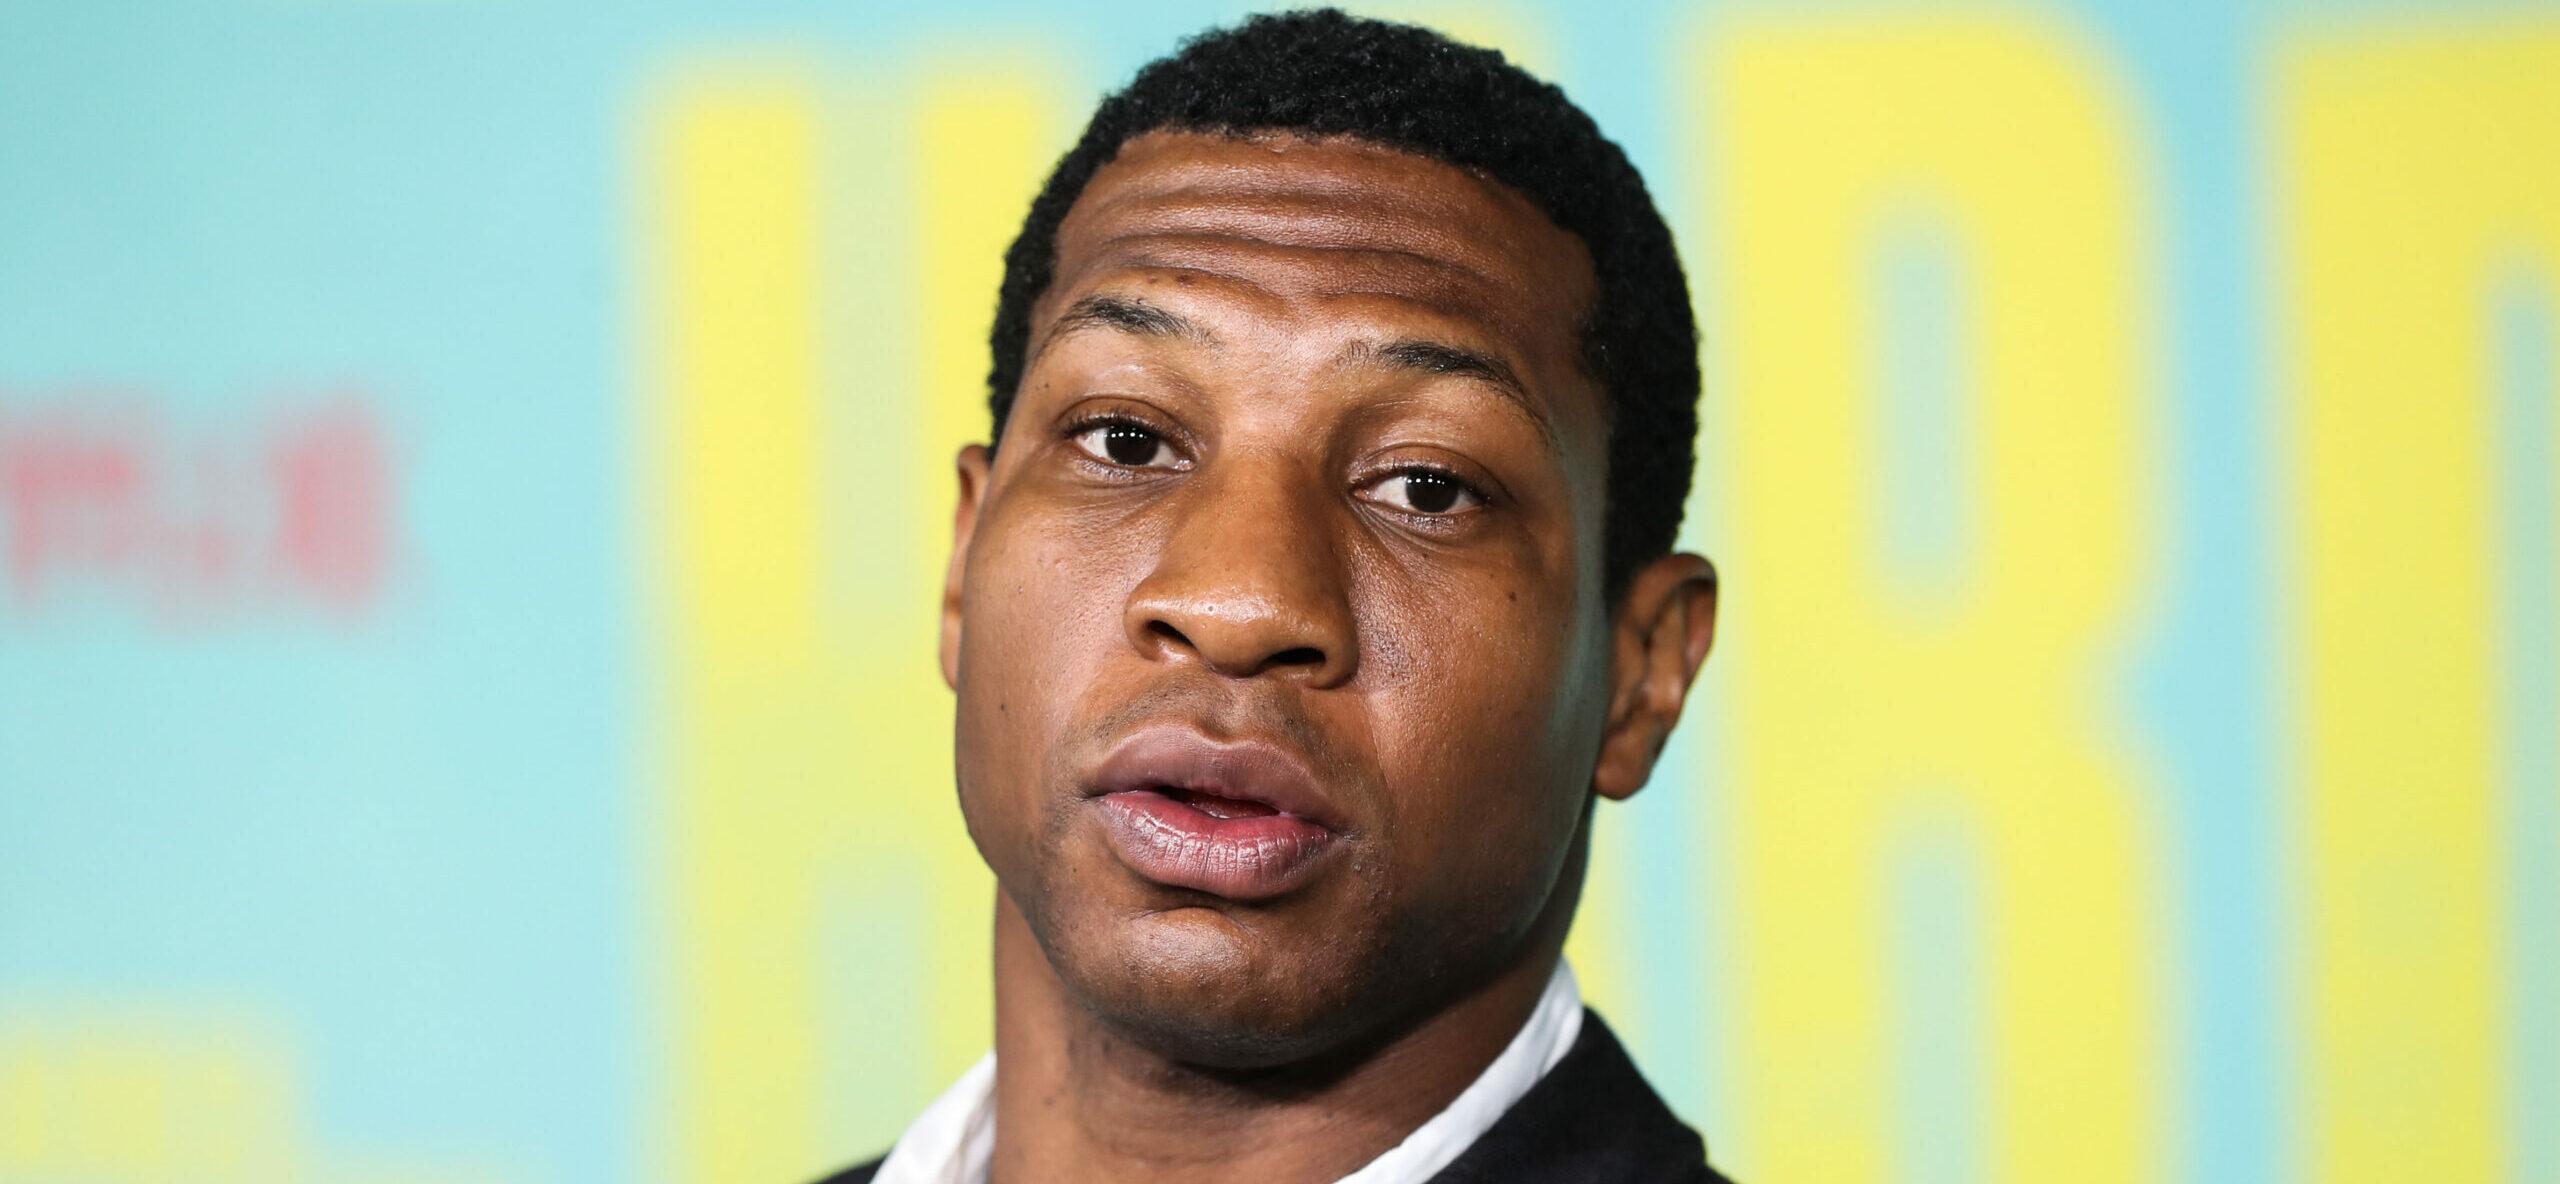 Jonathan Majors Los Angeles Premiere Of Netflix's 'The Harder They Fall'